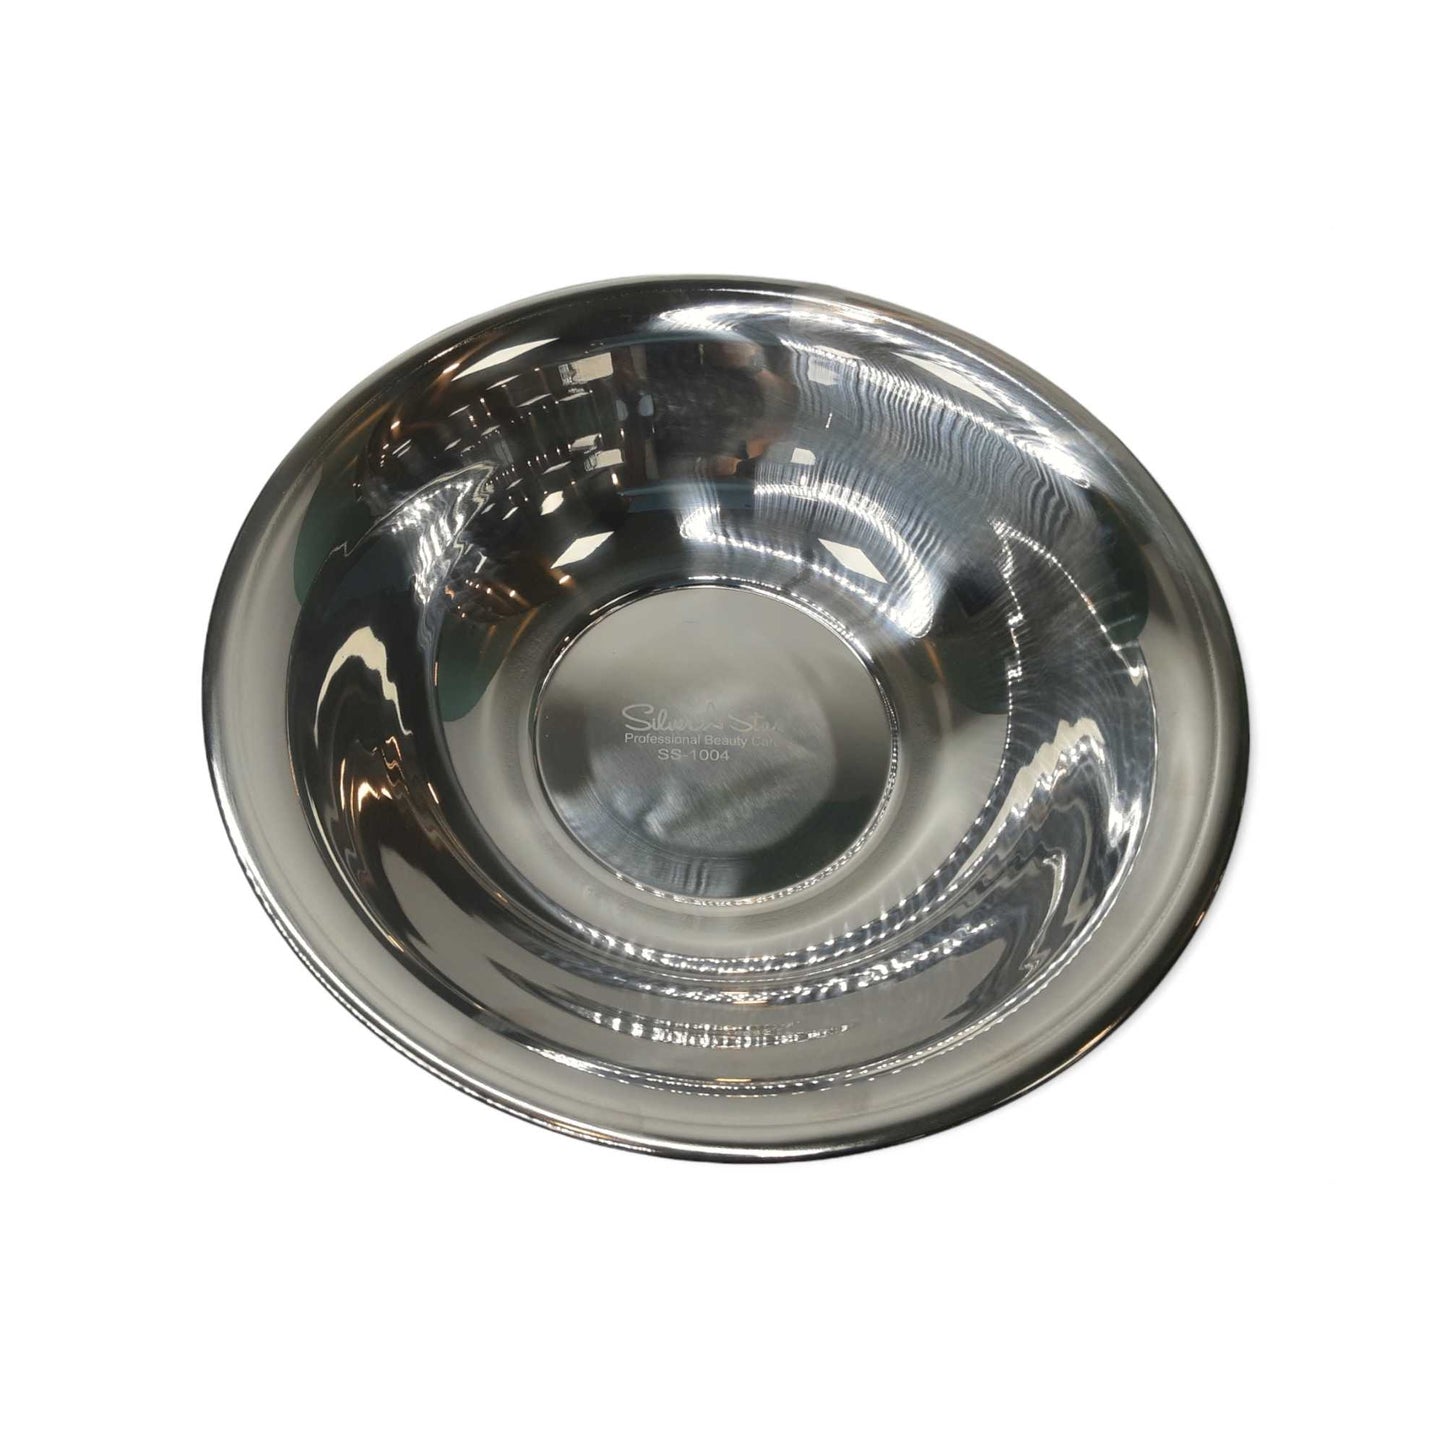 Silver Star Stainless Steel Bowl (34cm) #SS-1004 Classique Nails Beauty Supply Inc.